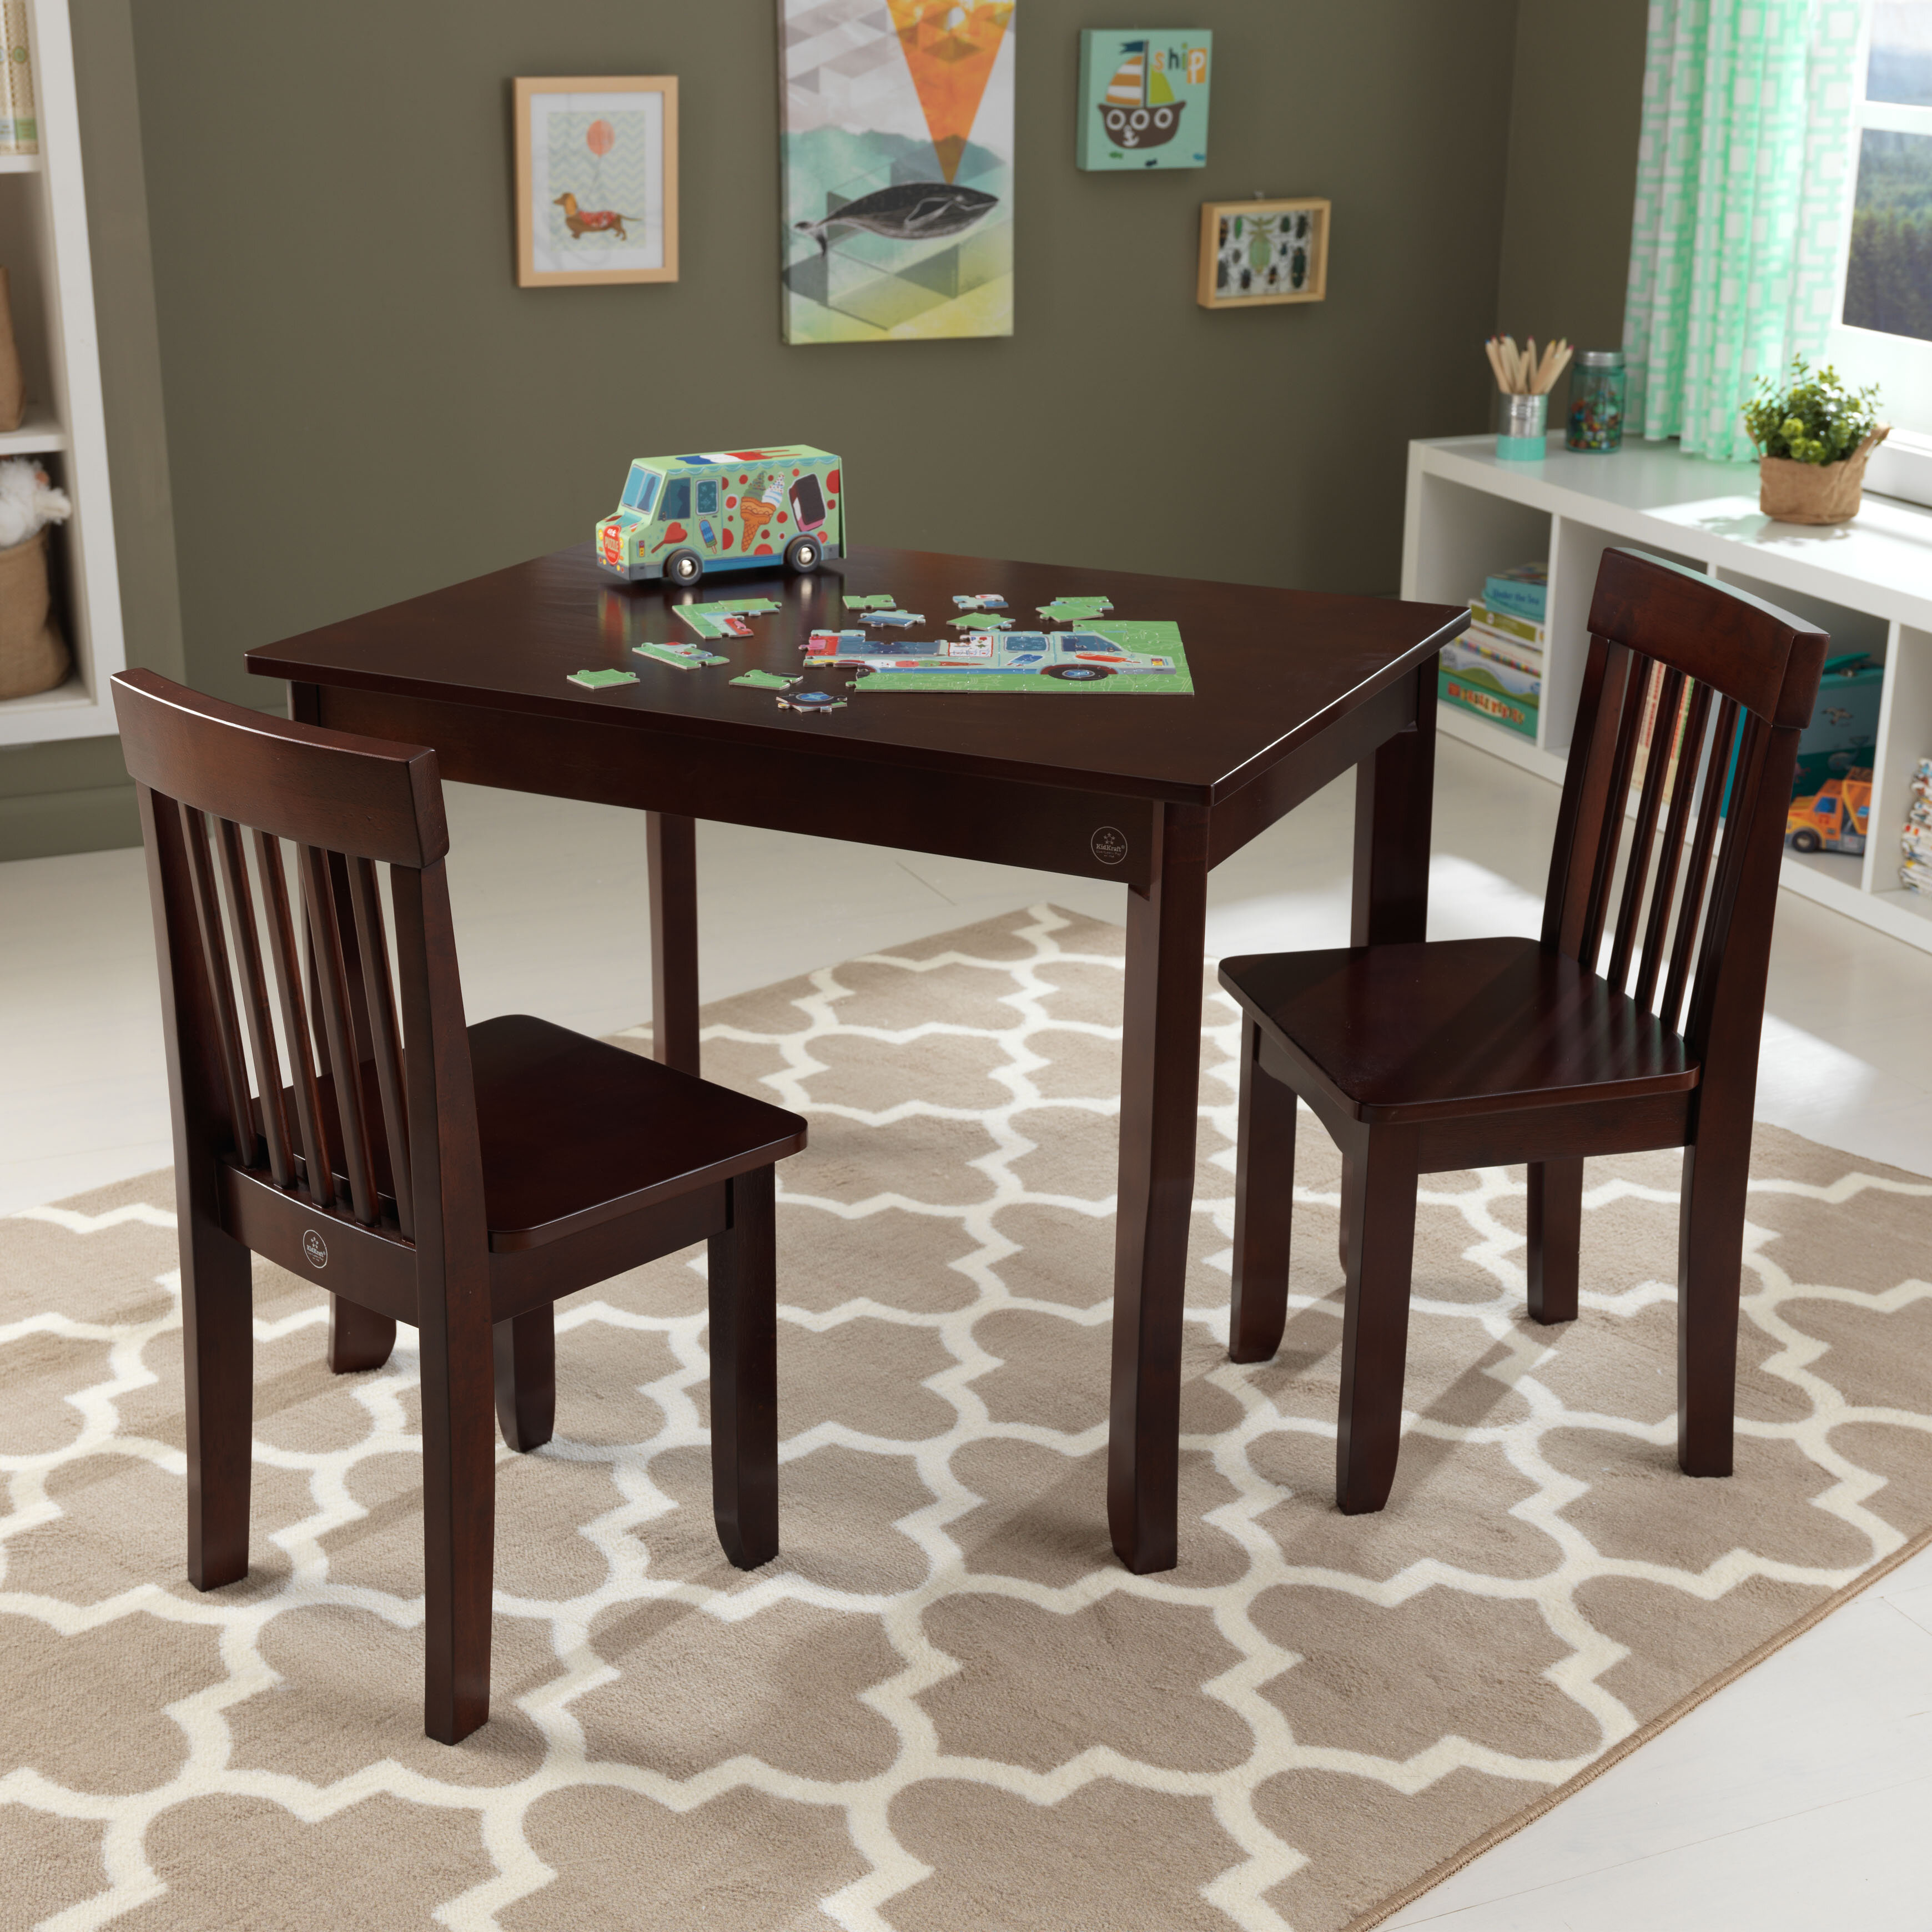 Kidkraft Avalon Kids 3 Piece Play Table And Chair Set Reviews